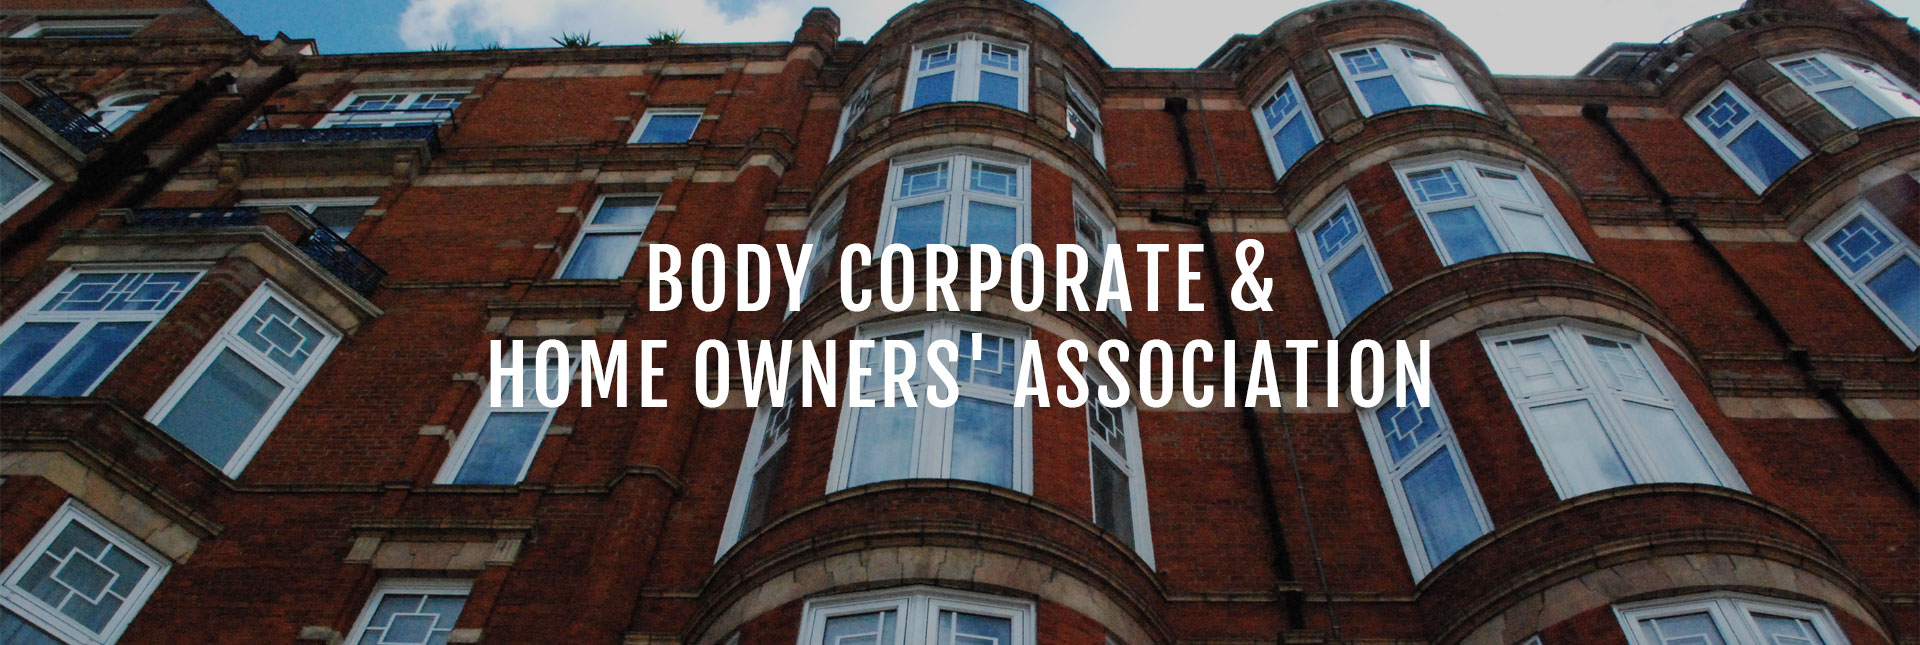 Homeowner insurance, body corporate & homeowners association